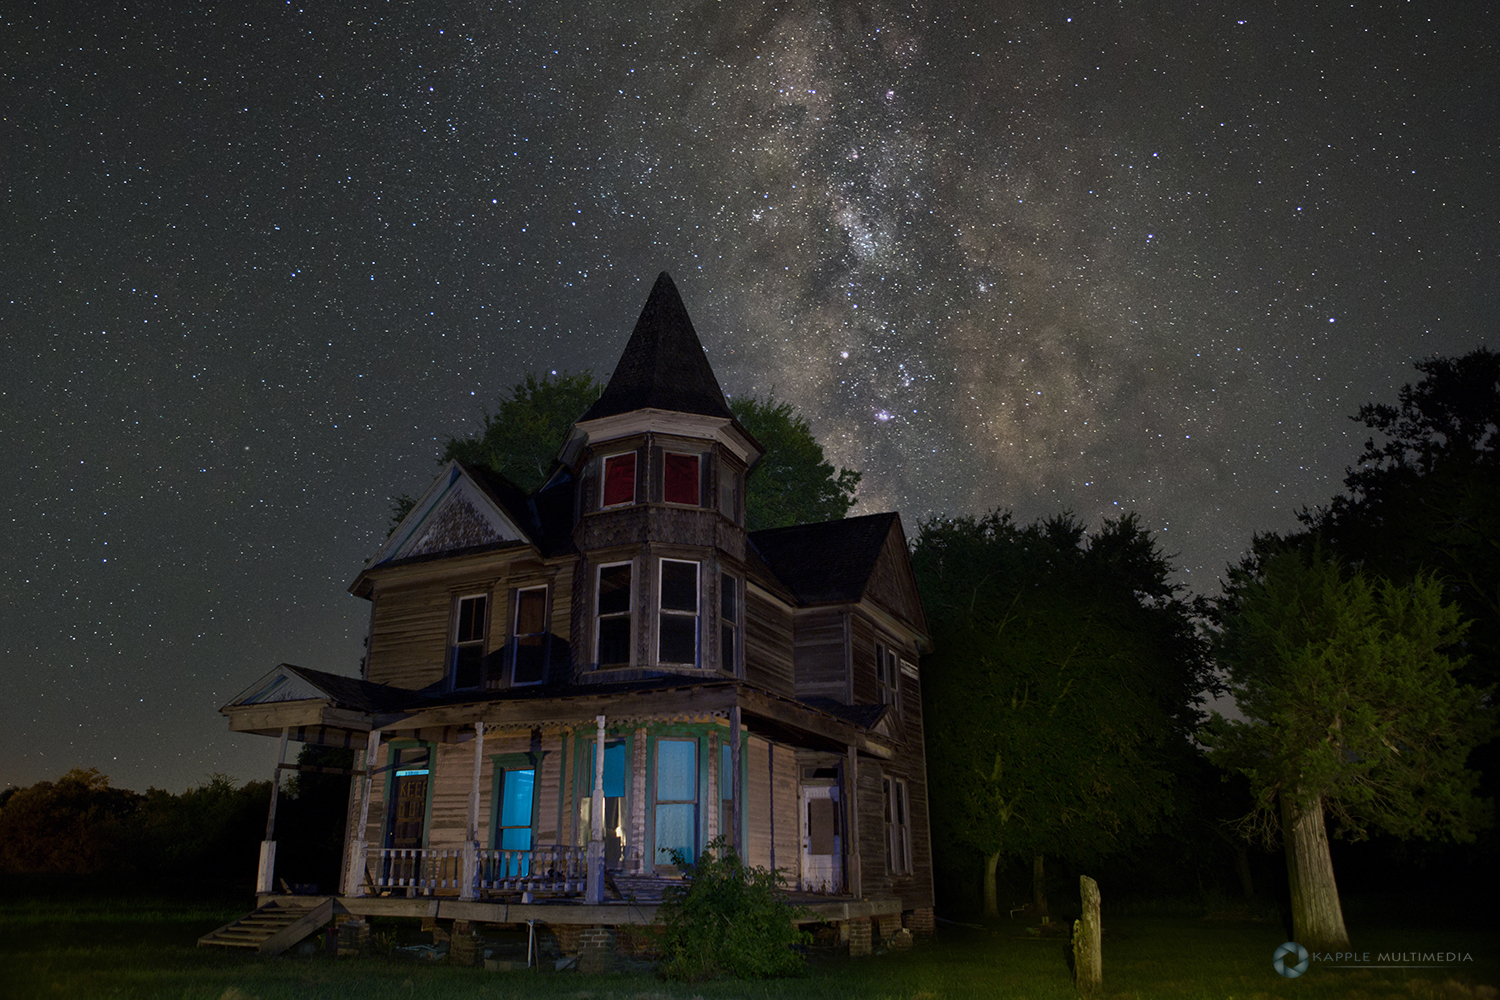 Abandoned Victorian Era Home under the Milky Way in Kosse Texas